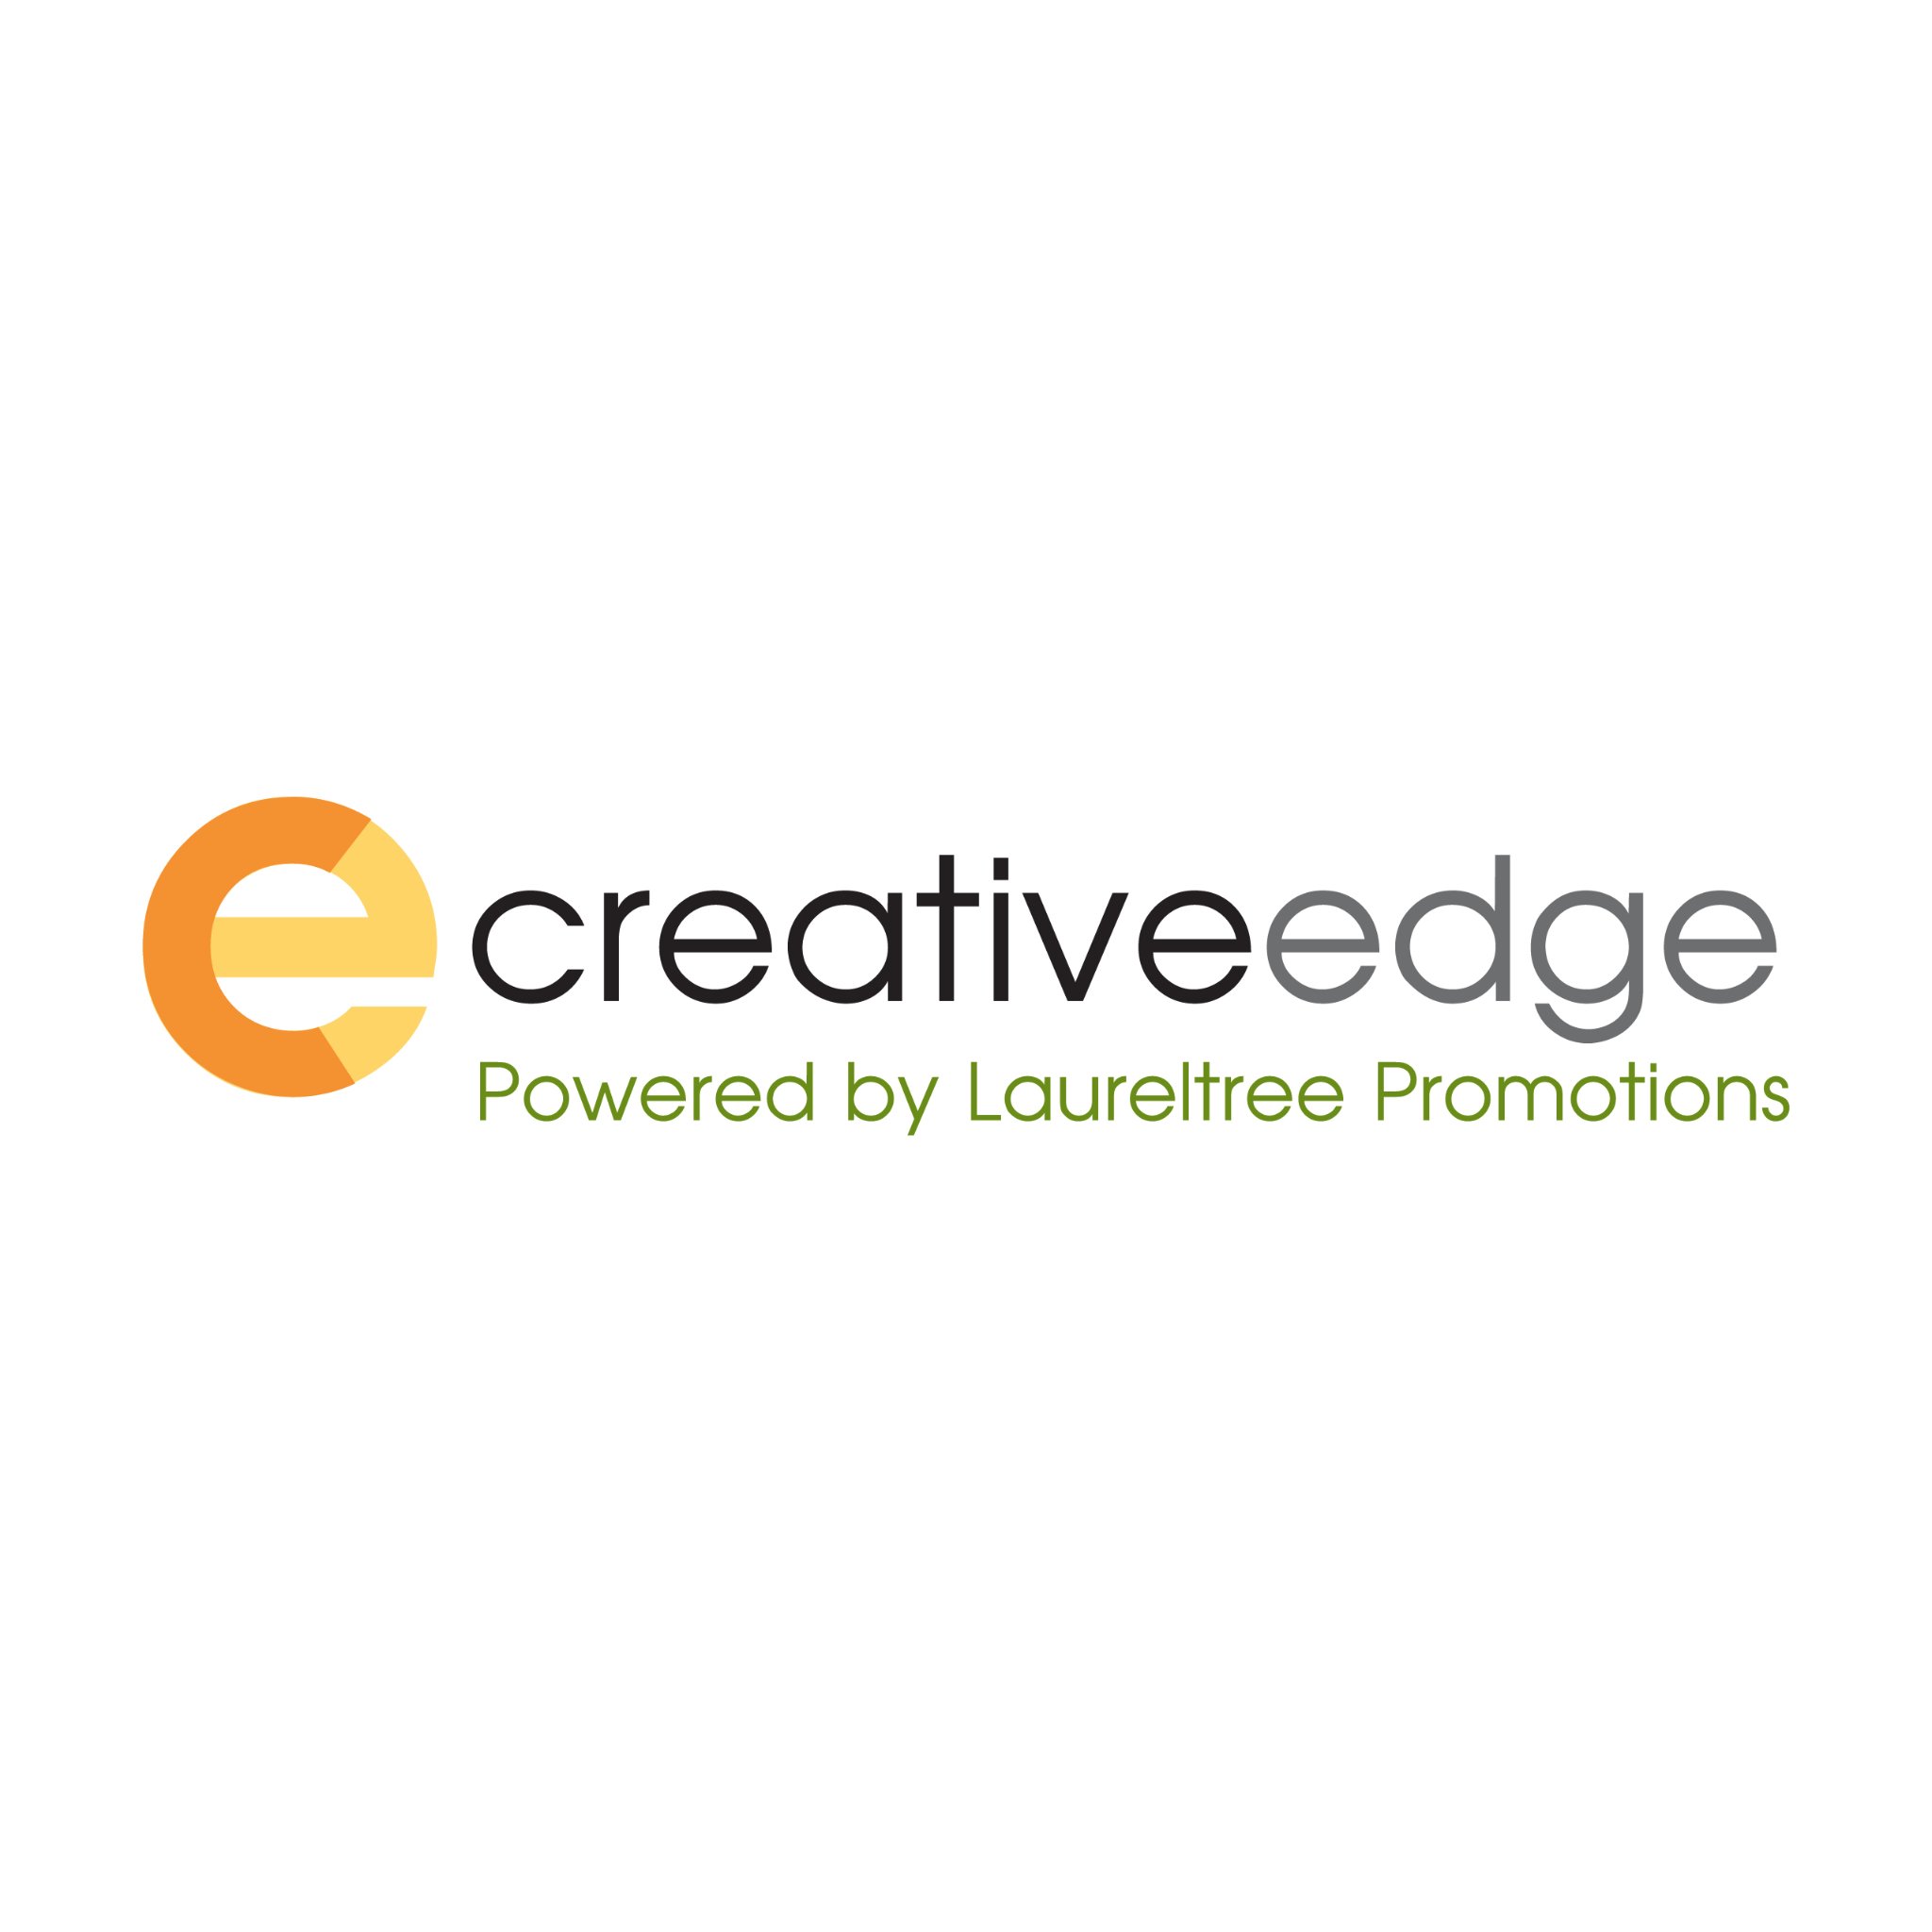 CreativeEdge (powered by Laureltree Promotions) is dedicated to providing realtors with the promotional marketing tools they need! https://t.co/hZOfYmpM4k